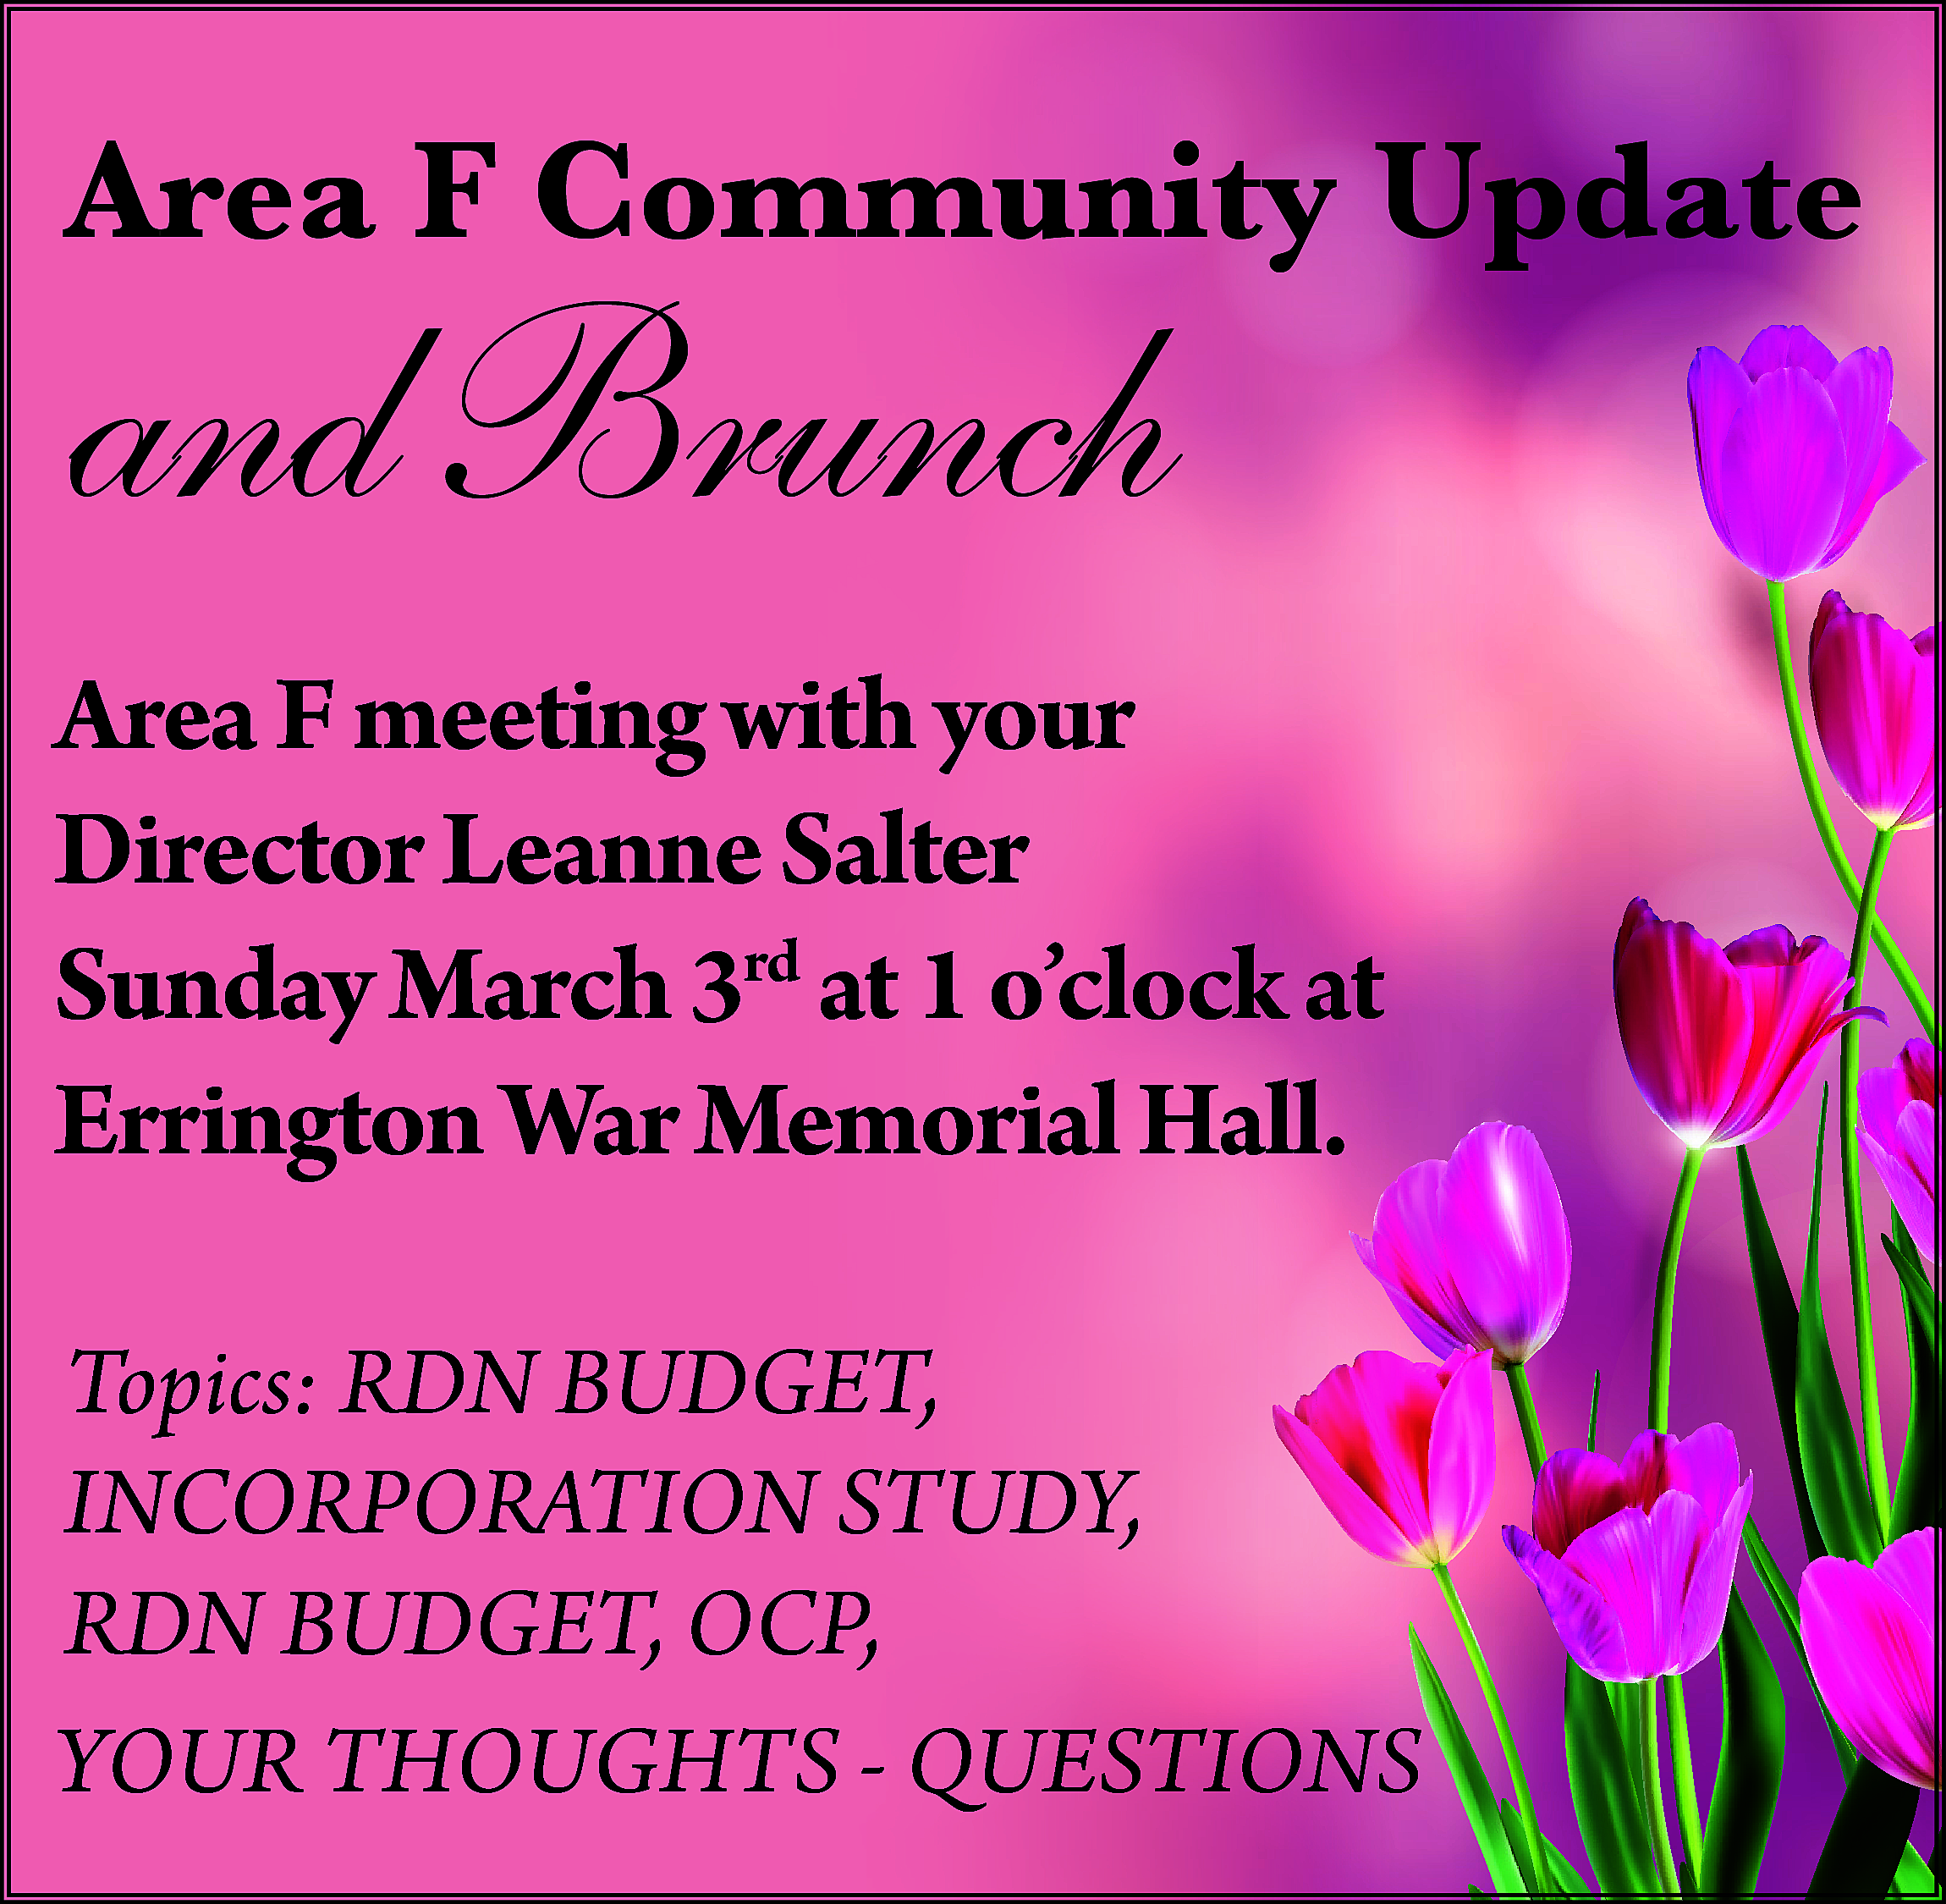 Area F Community Update <br>  Area F Community Update    and Brunch    Area F meeting with your  Director Leanne Salter  Sunday March 3rd at 1 o’clock at  Errington War Memorial Hall.  Topics: RDN BUDGET,  INCORPORATION STUDY,  RDN BUDGET, OCP,  YOUR THOUGHTS - QUESTIONS    